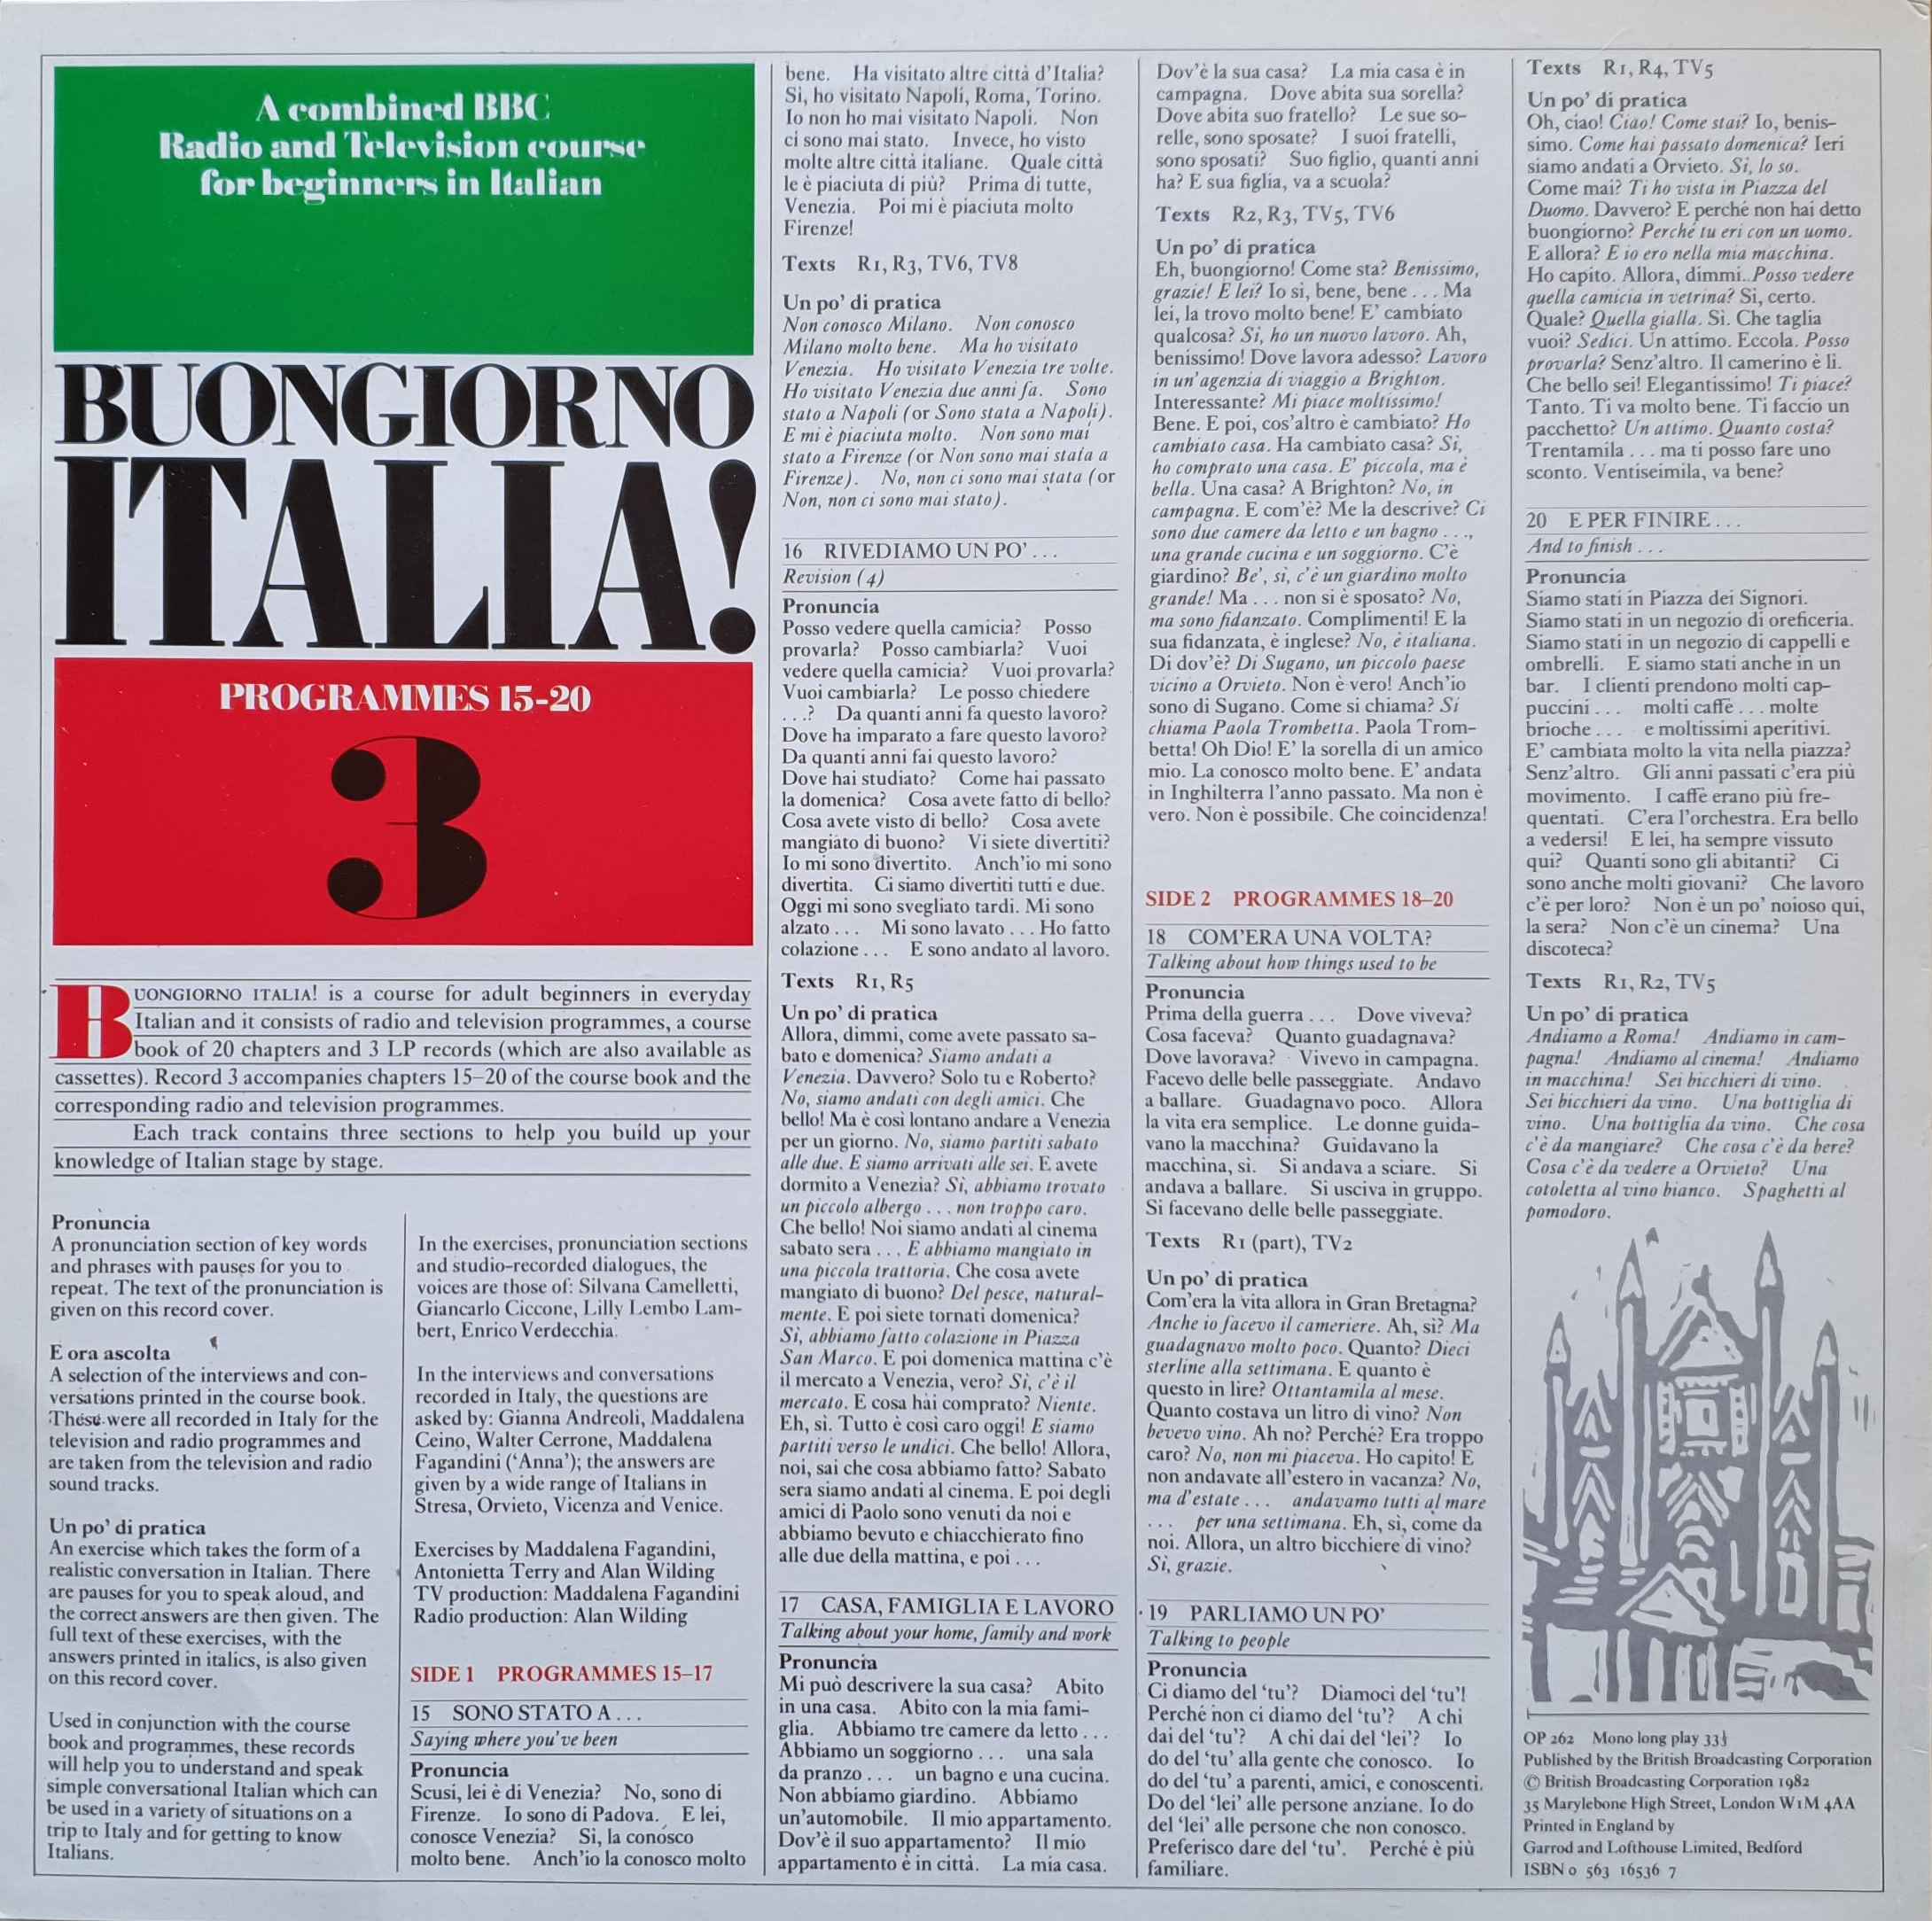 Picture of OP 262 Buongiorno Italia - 15-20 by artist Maddalena Fagandini / Antonietta Terry / Alan Wilding from the BBC records and Tapes library